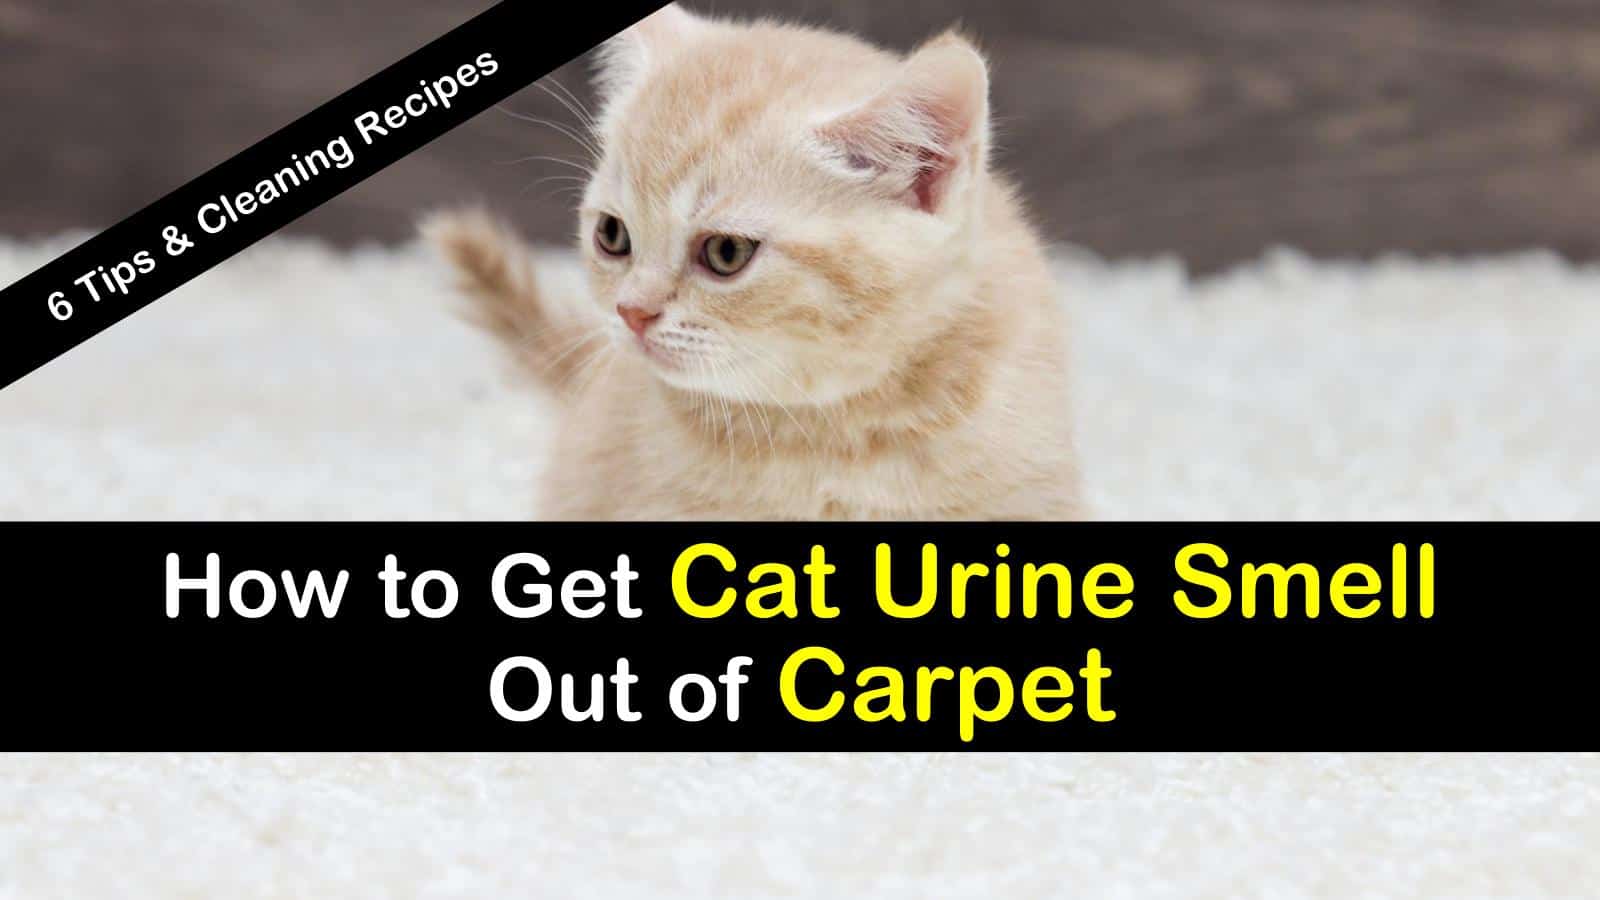 How to Get Cat Urine Smell Out of Carpet